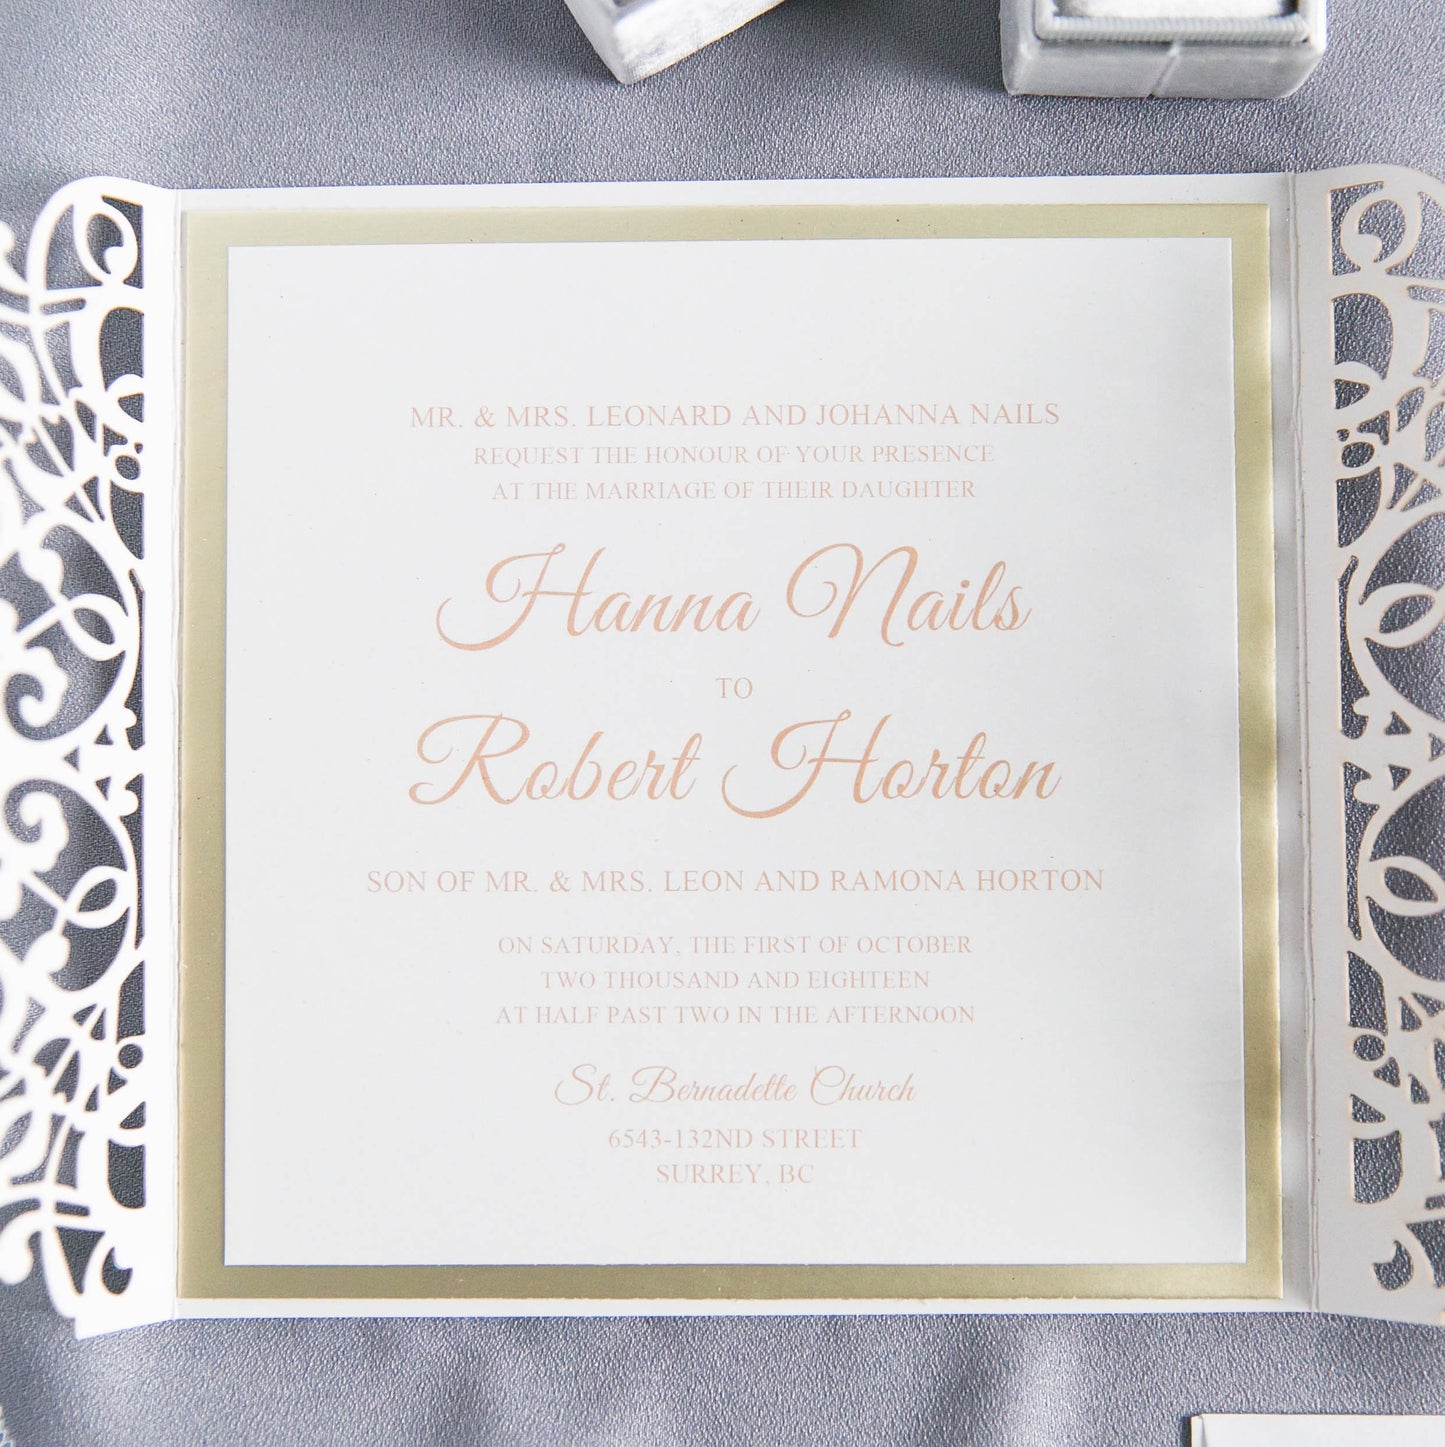 open wedding invitation with printed details